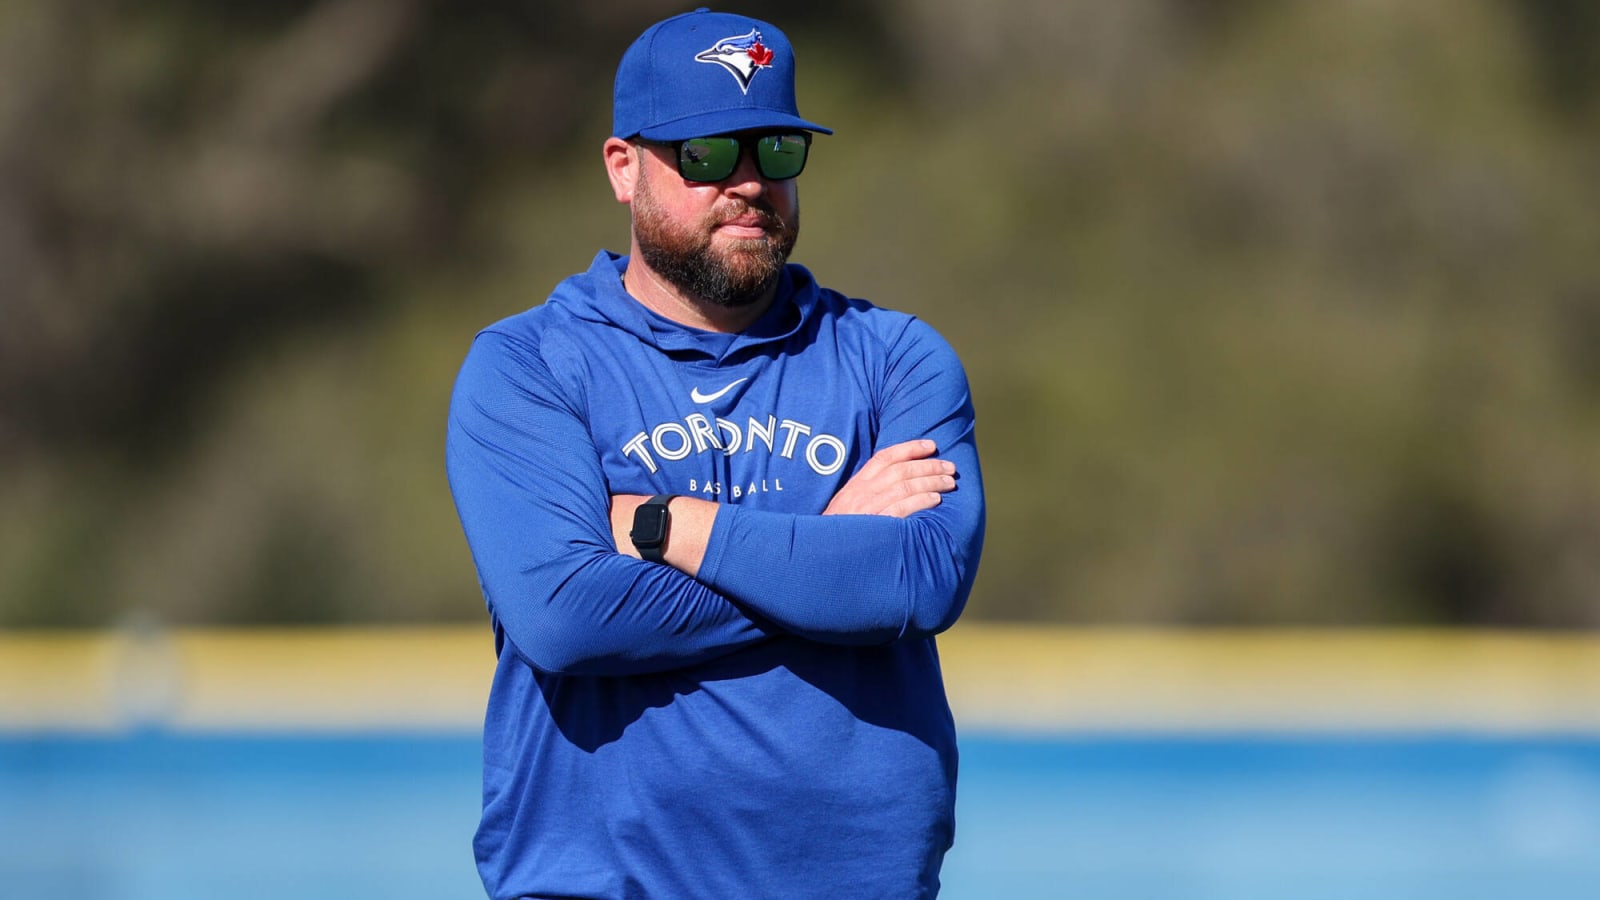 Blue Jays manager John Schneider saves local woman from choking with Heimlich maneuver